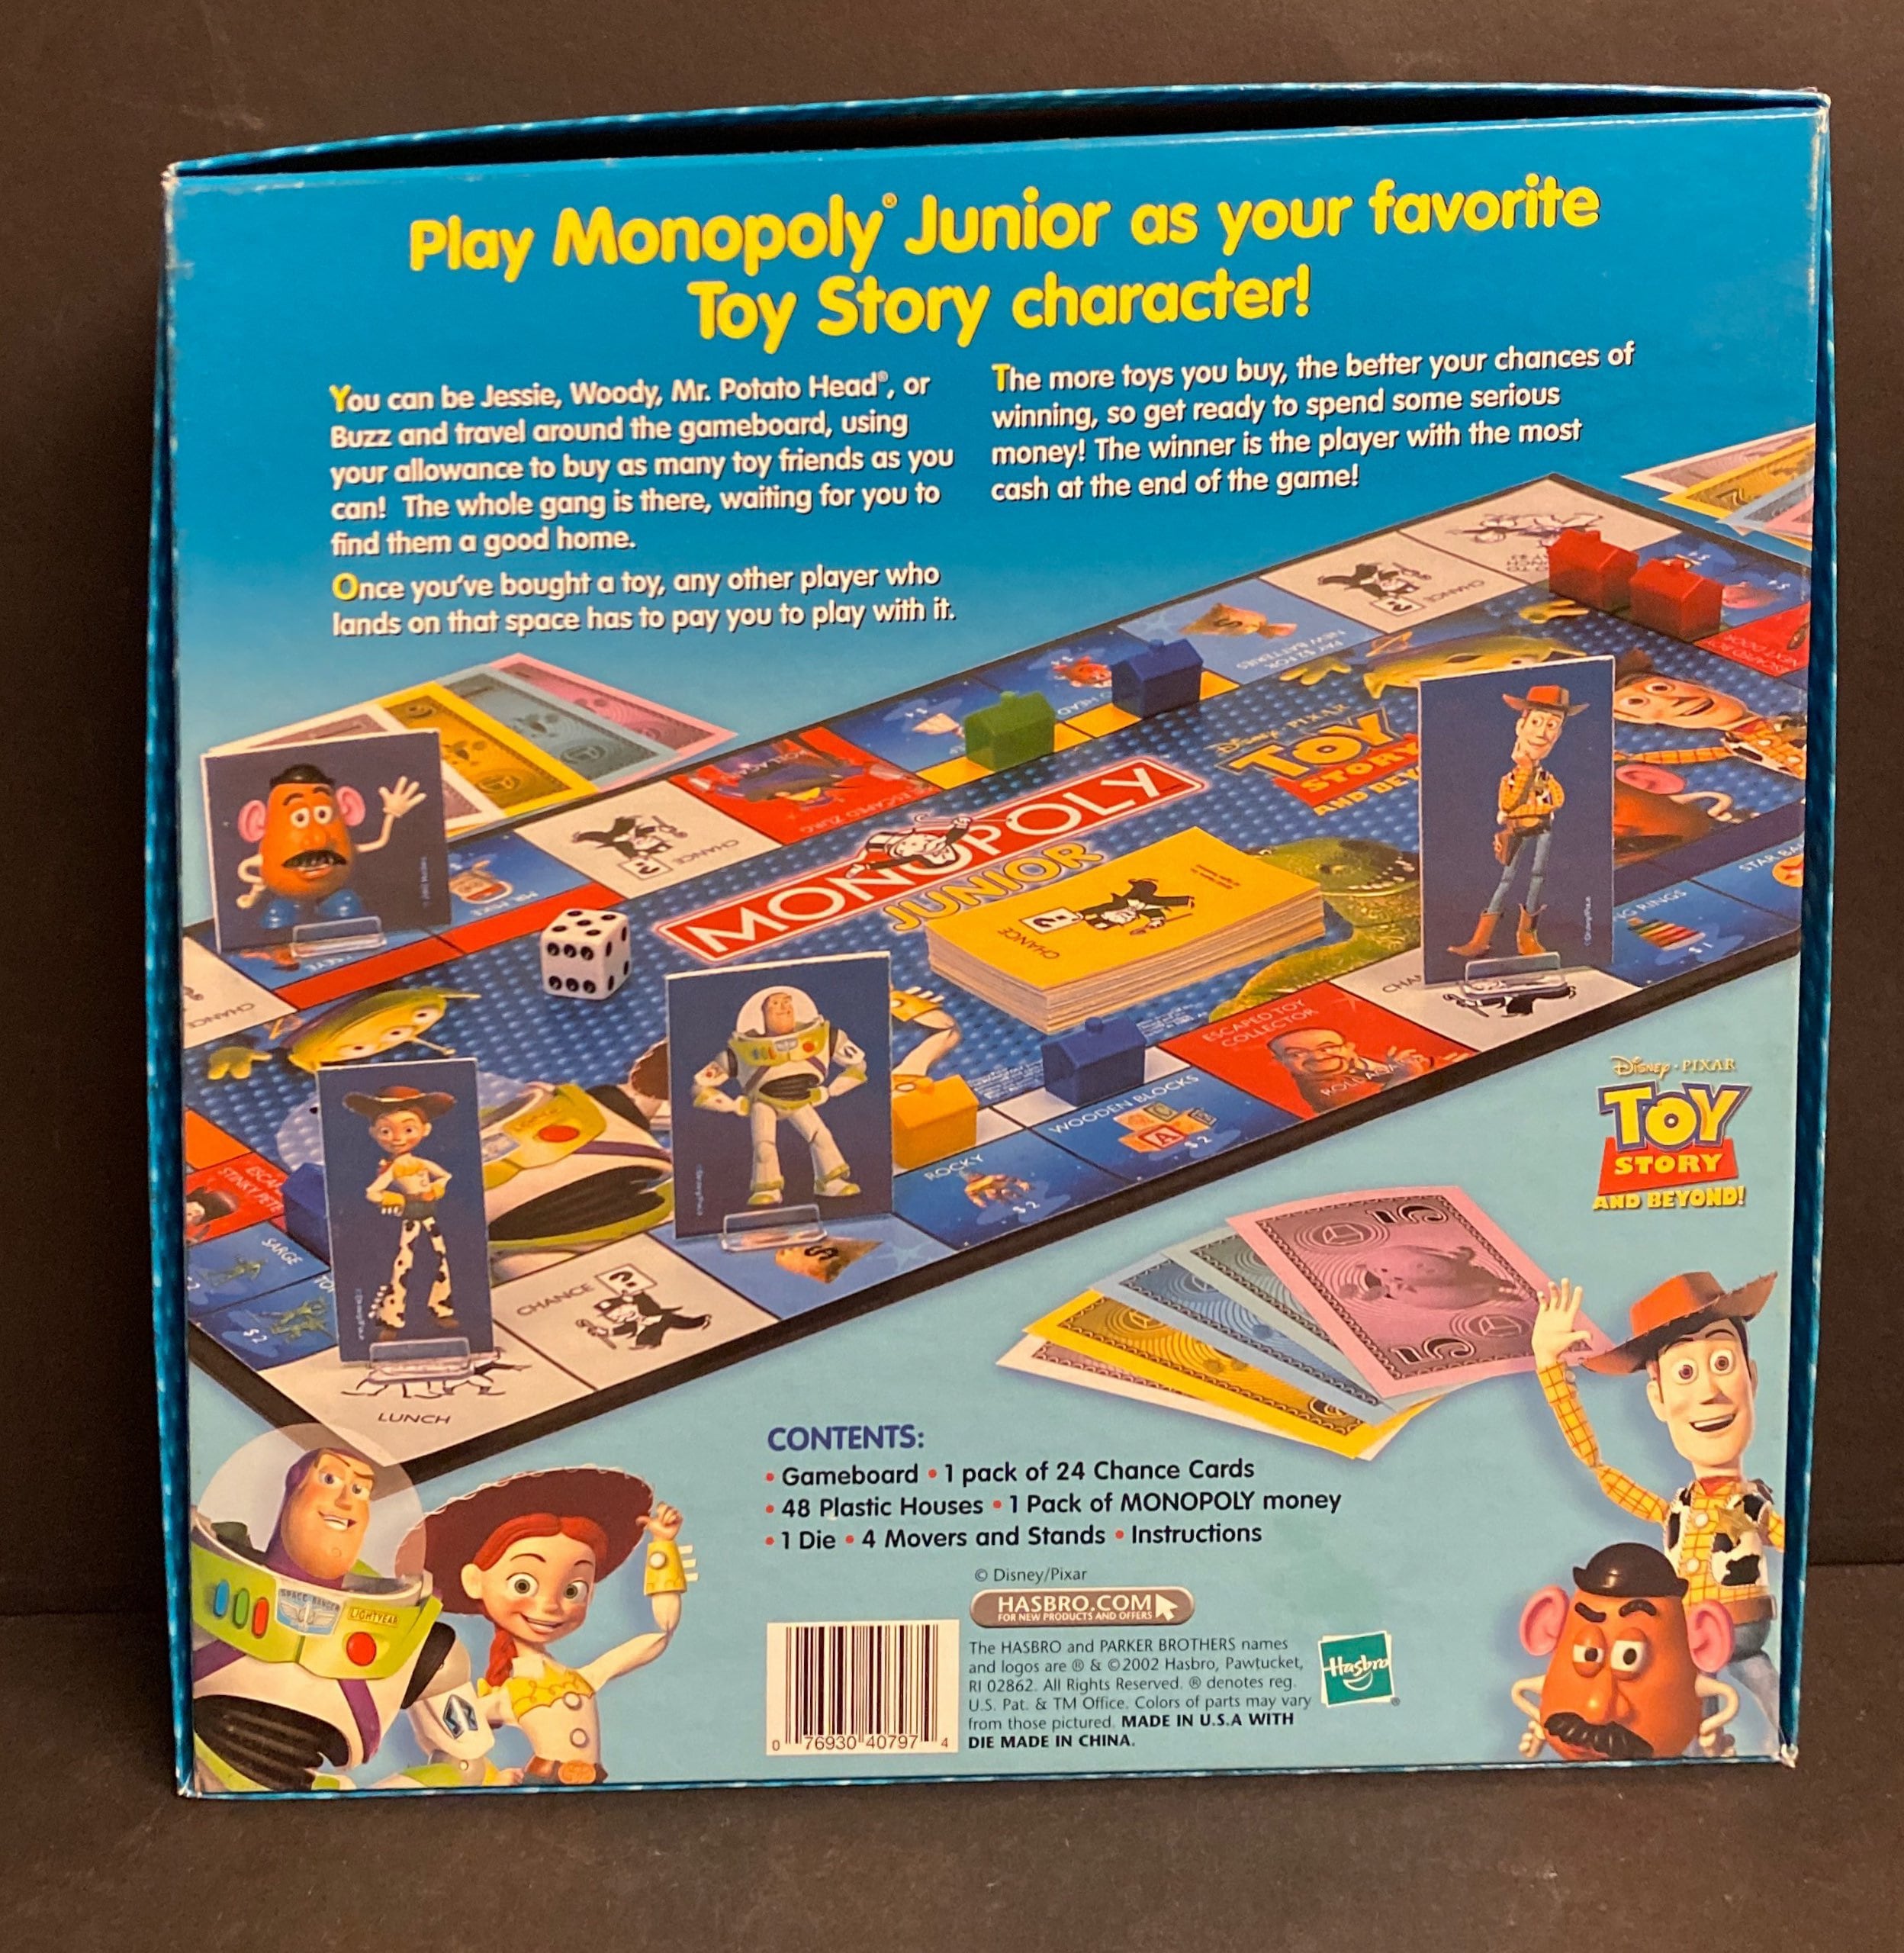 How to play Monopoly Junior 